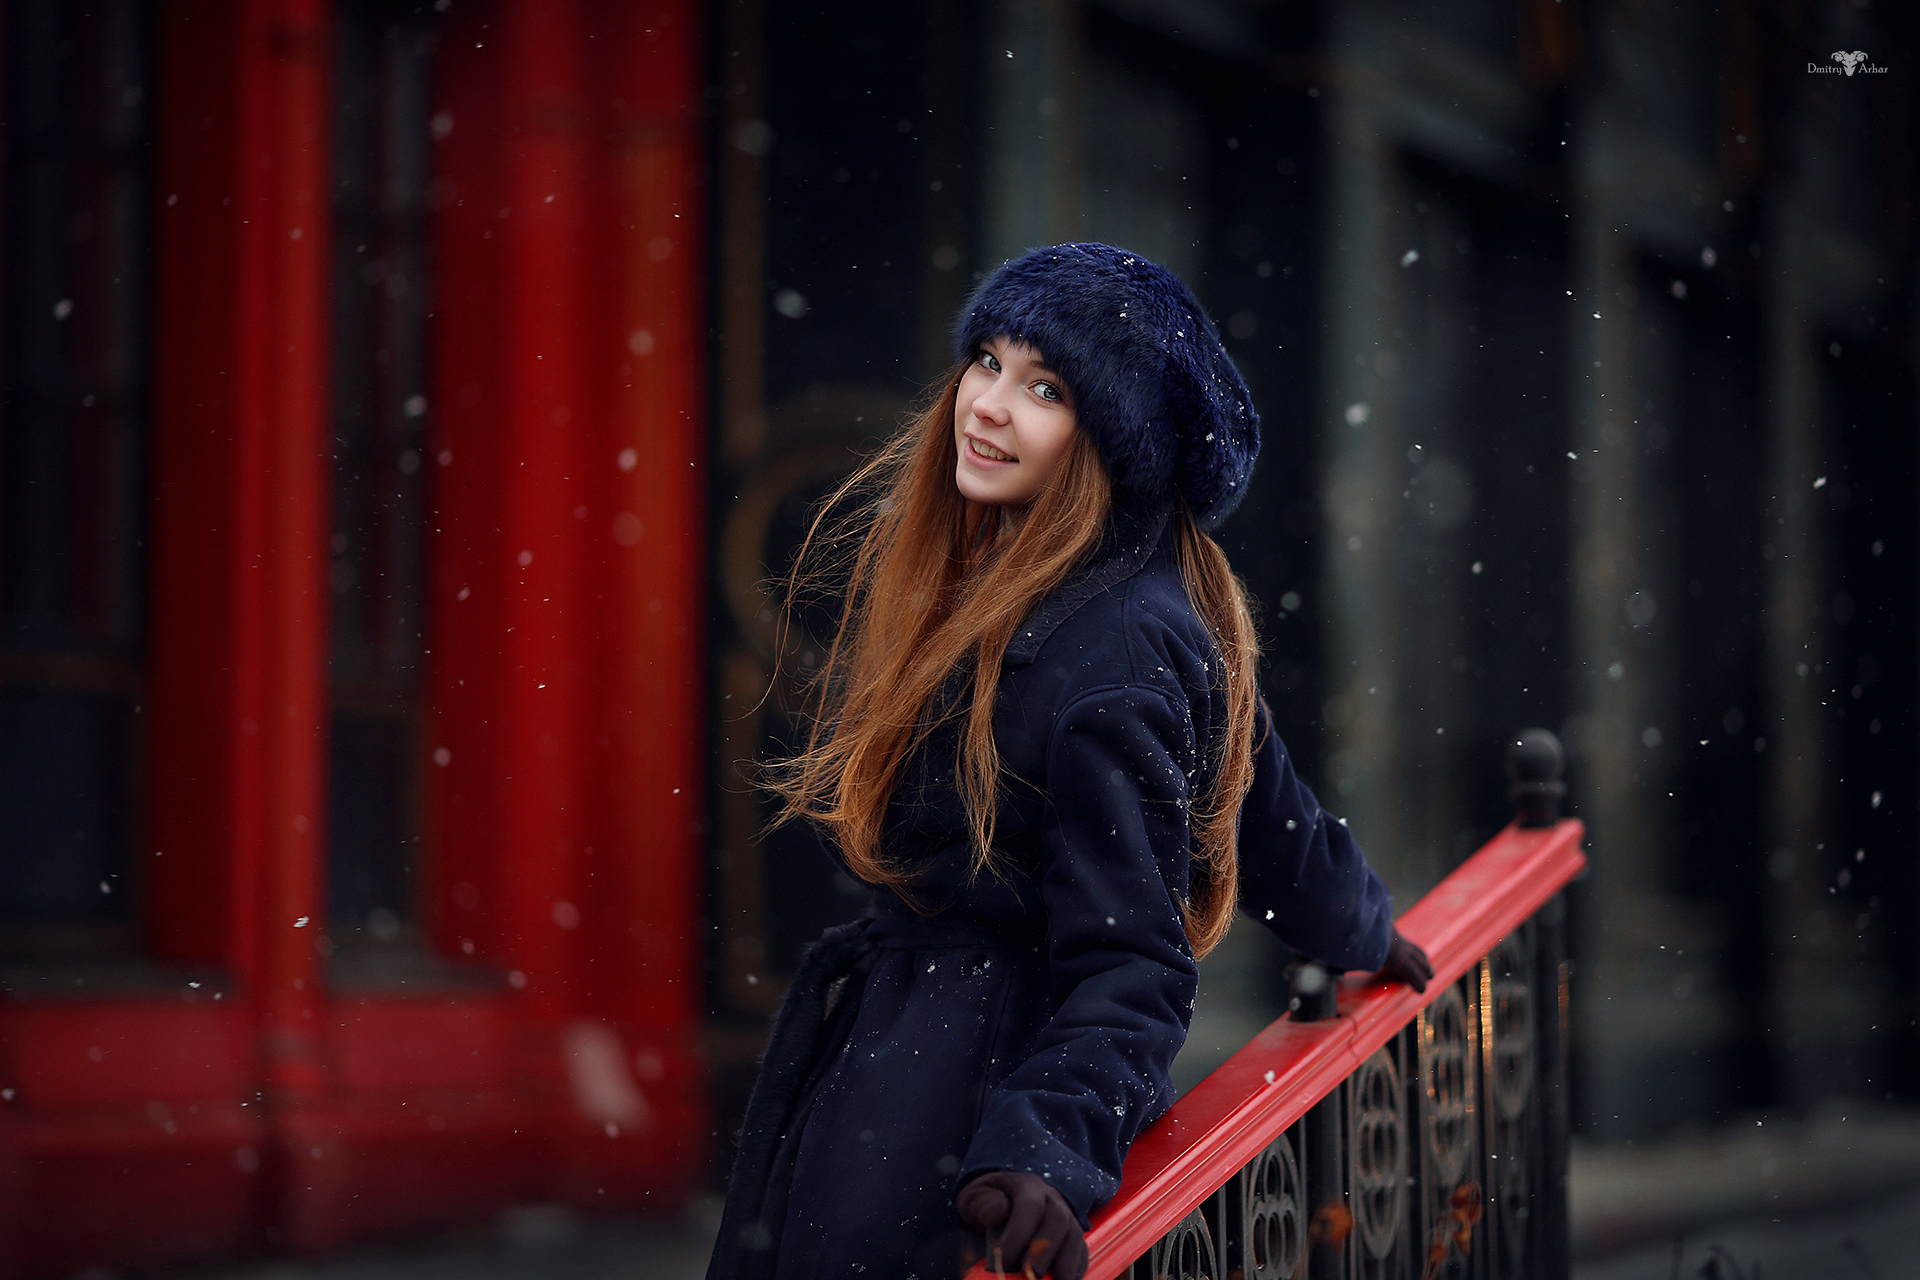 People 1920x1280 Dmitry Arhar women model Russian women Russian model looking at viewer side view depth of field hat redhead smiling coats Russia back snow fur cap blue coat gloves overcoats Christina Vostruhina fashion glamour glamour girls blue cap classy young women watermarked outdoors